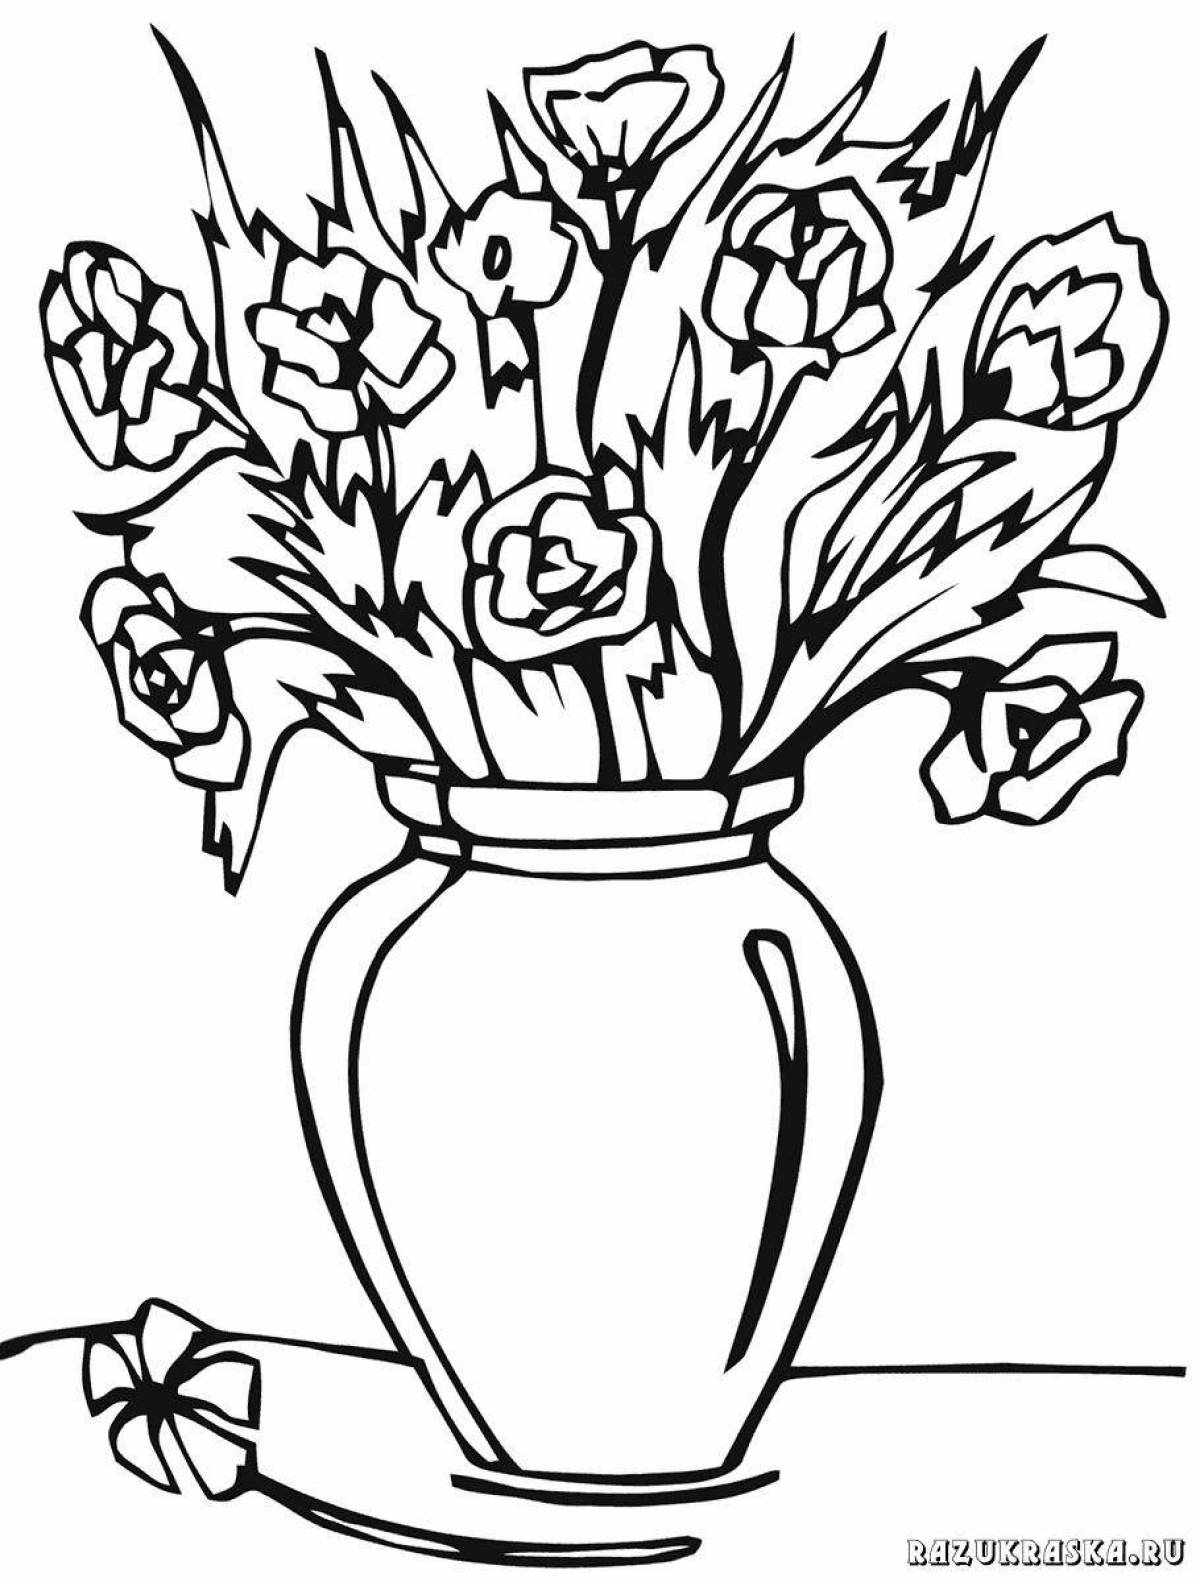 Delightful coloring flowers in a vase